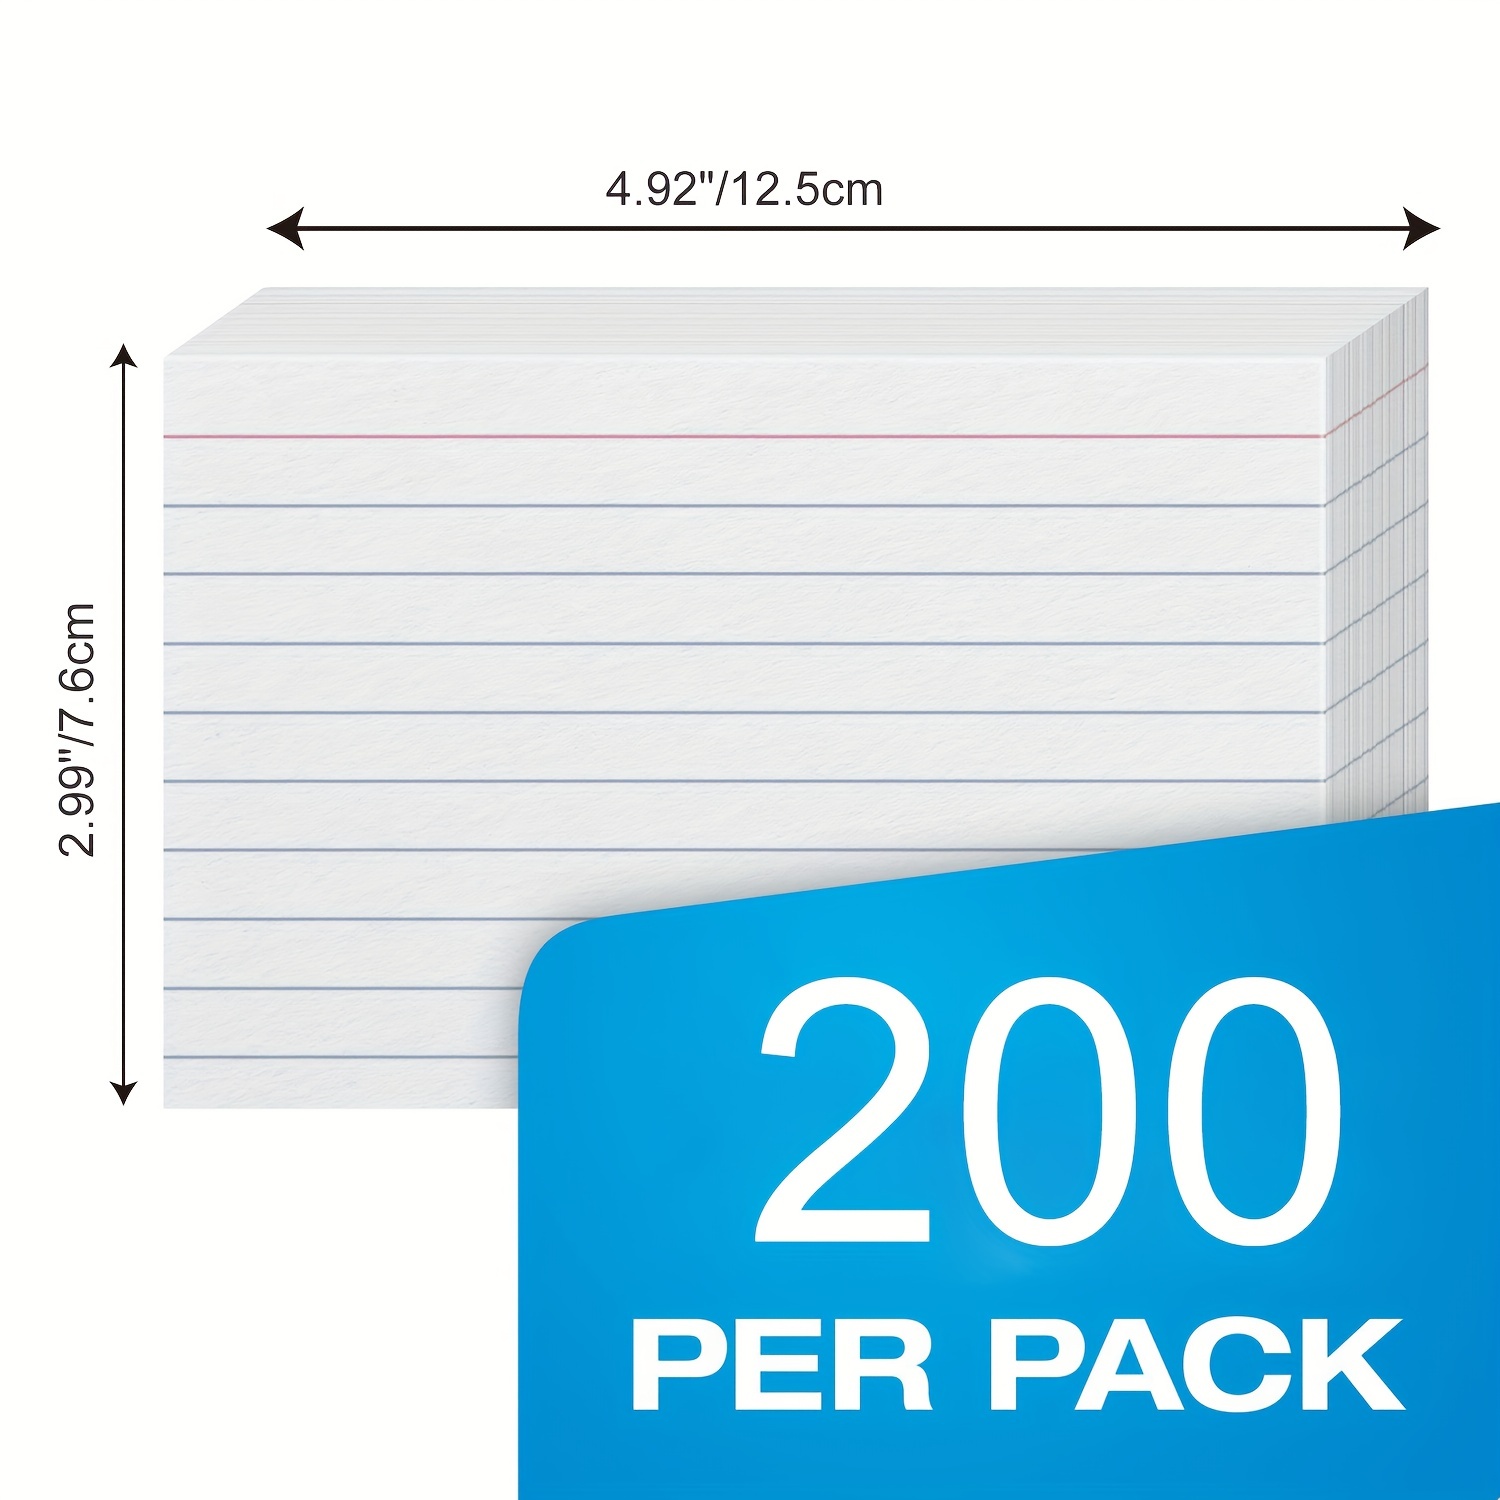 Colored Index Cards Dividers 3x5 Inches Tabbed Cards Ruled Note